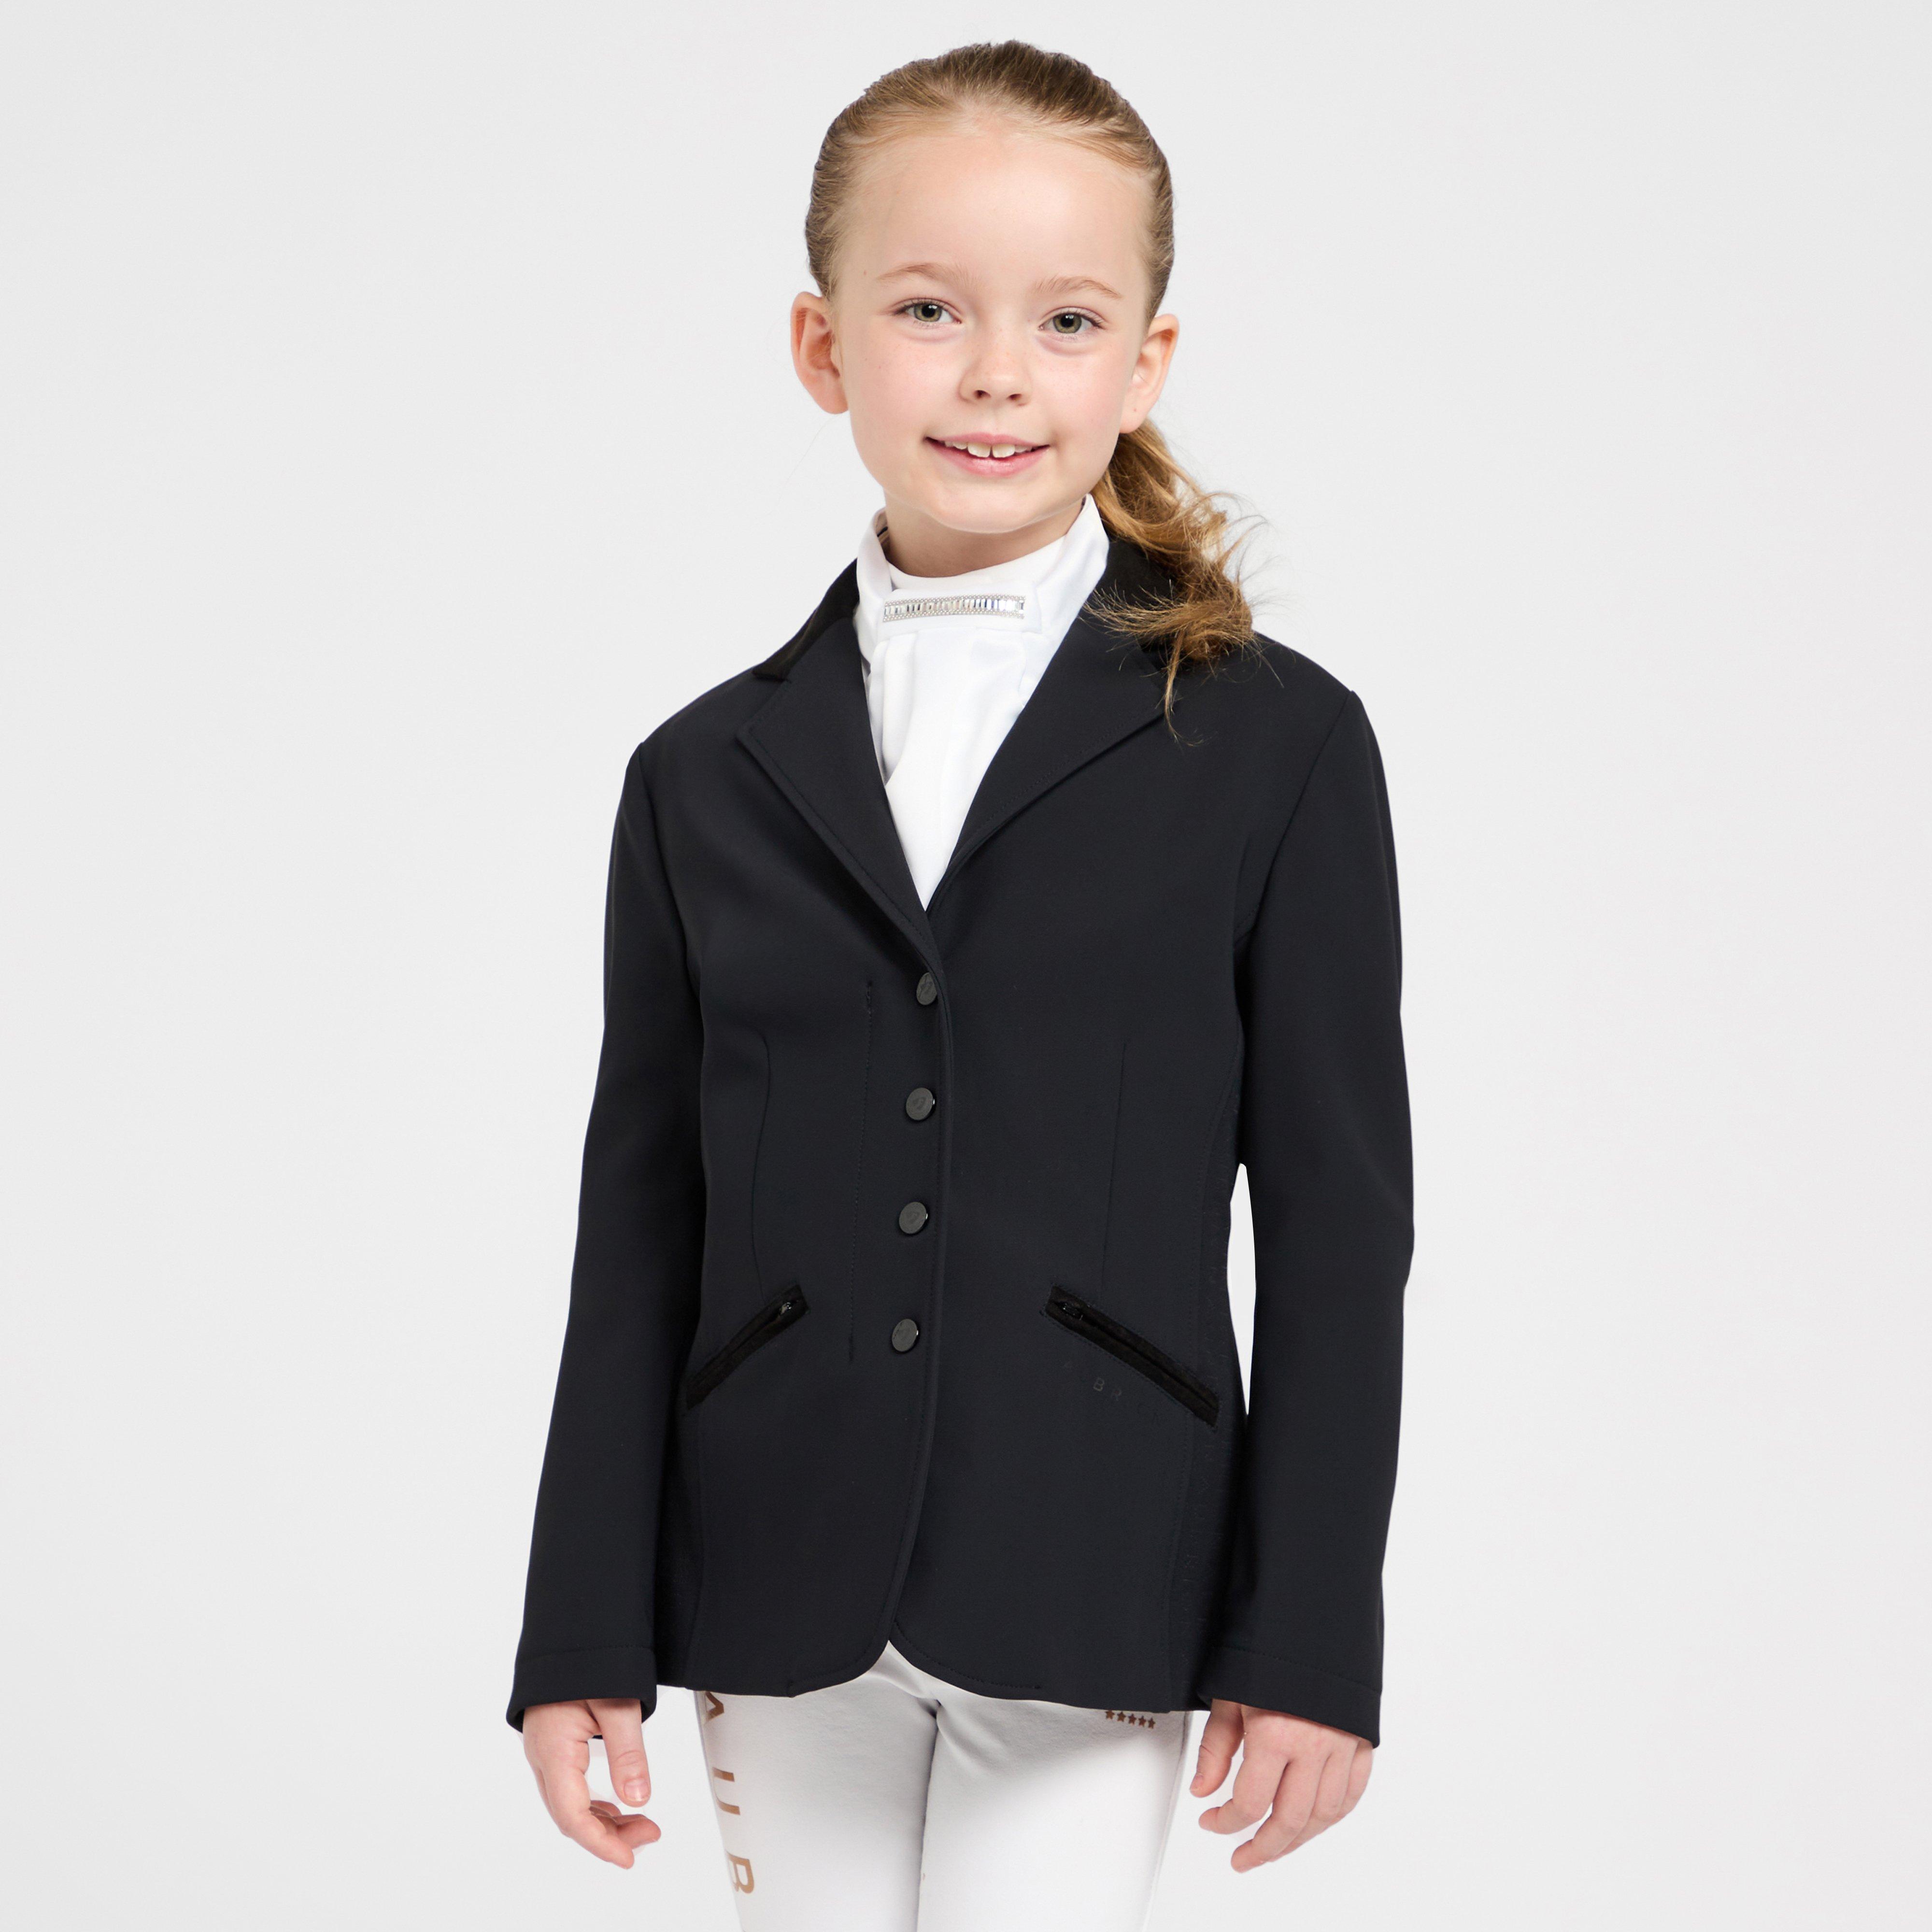 Young Rider Stafford Show Jacket Black